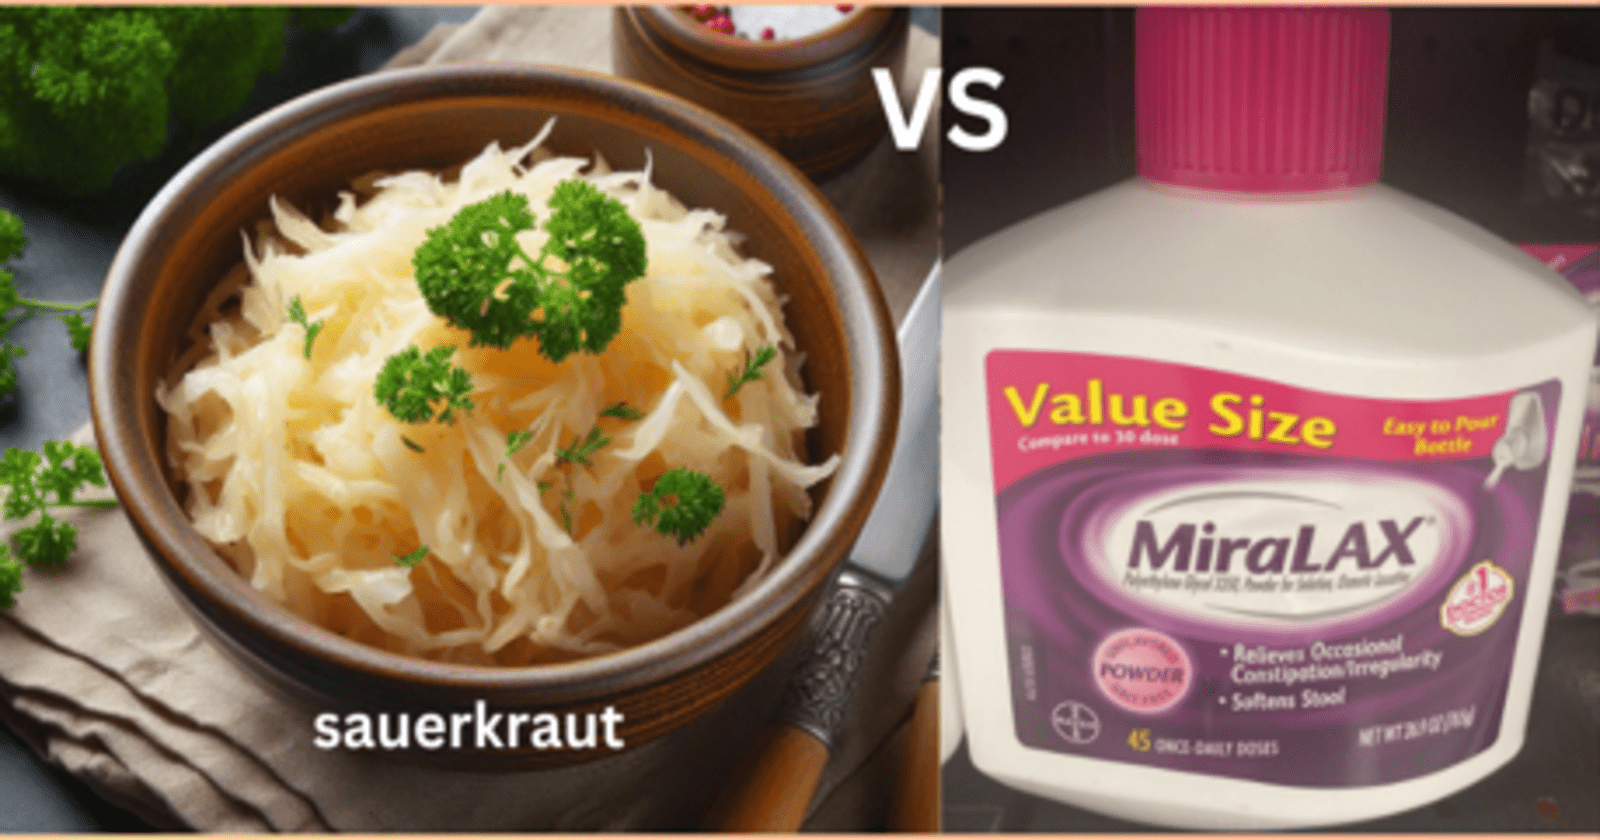 Probiotic vs Miralax: Which is better for constipation